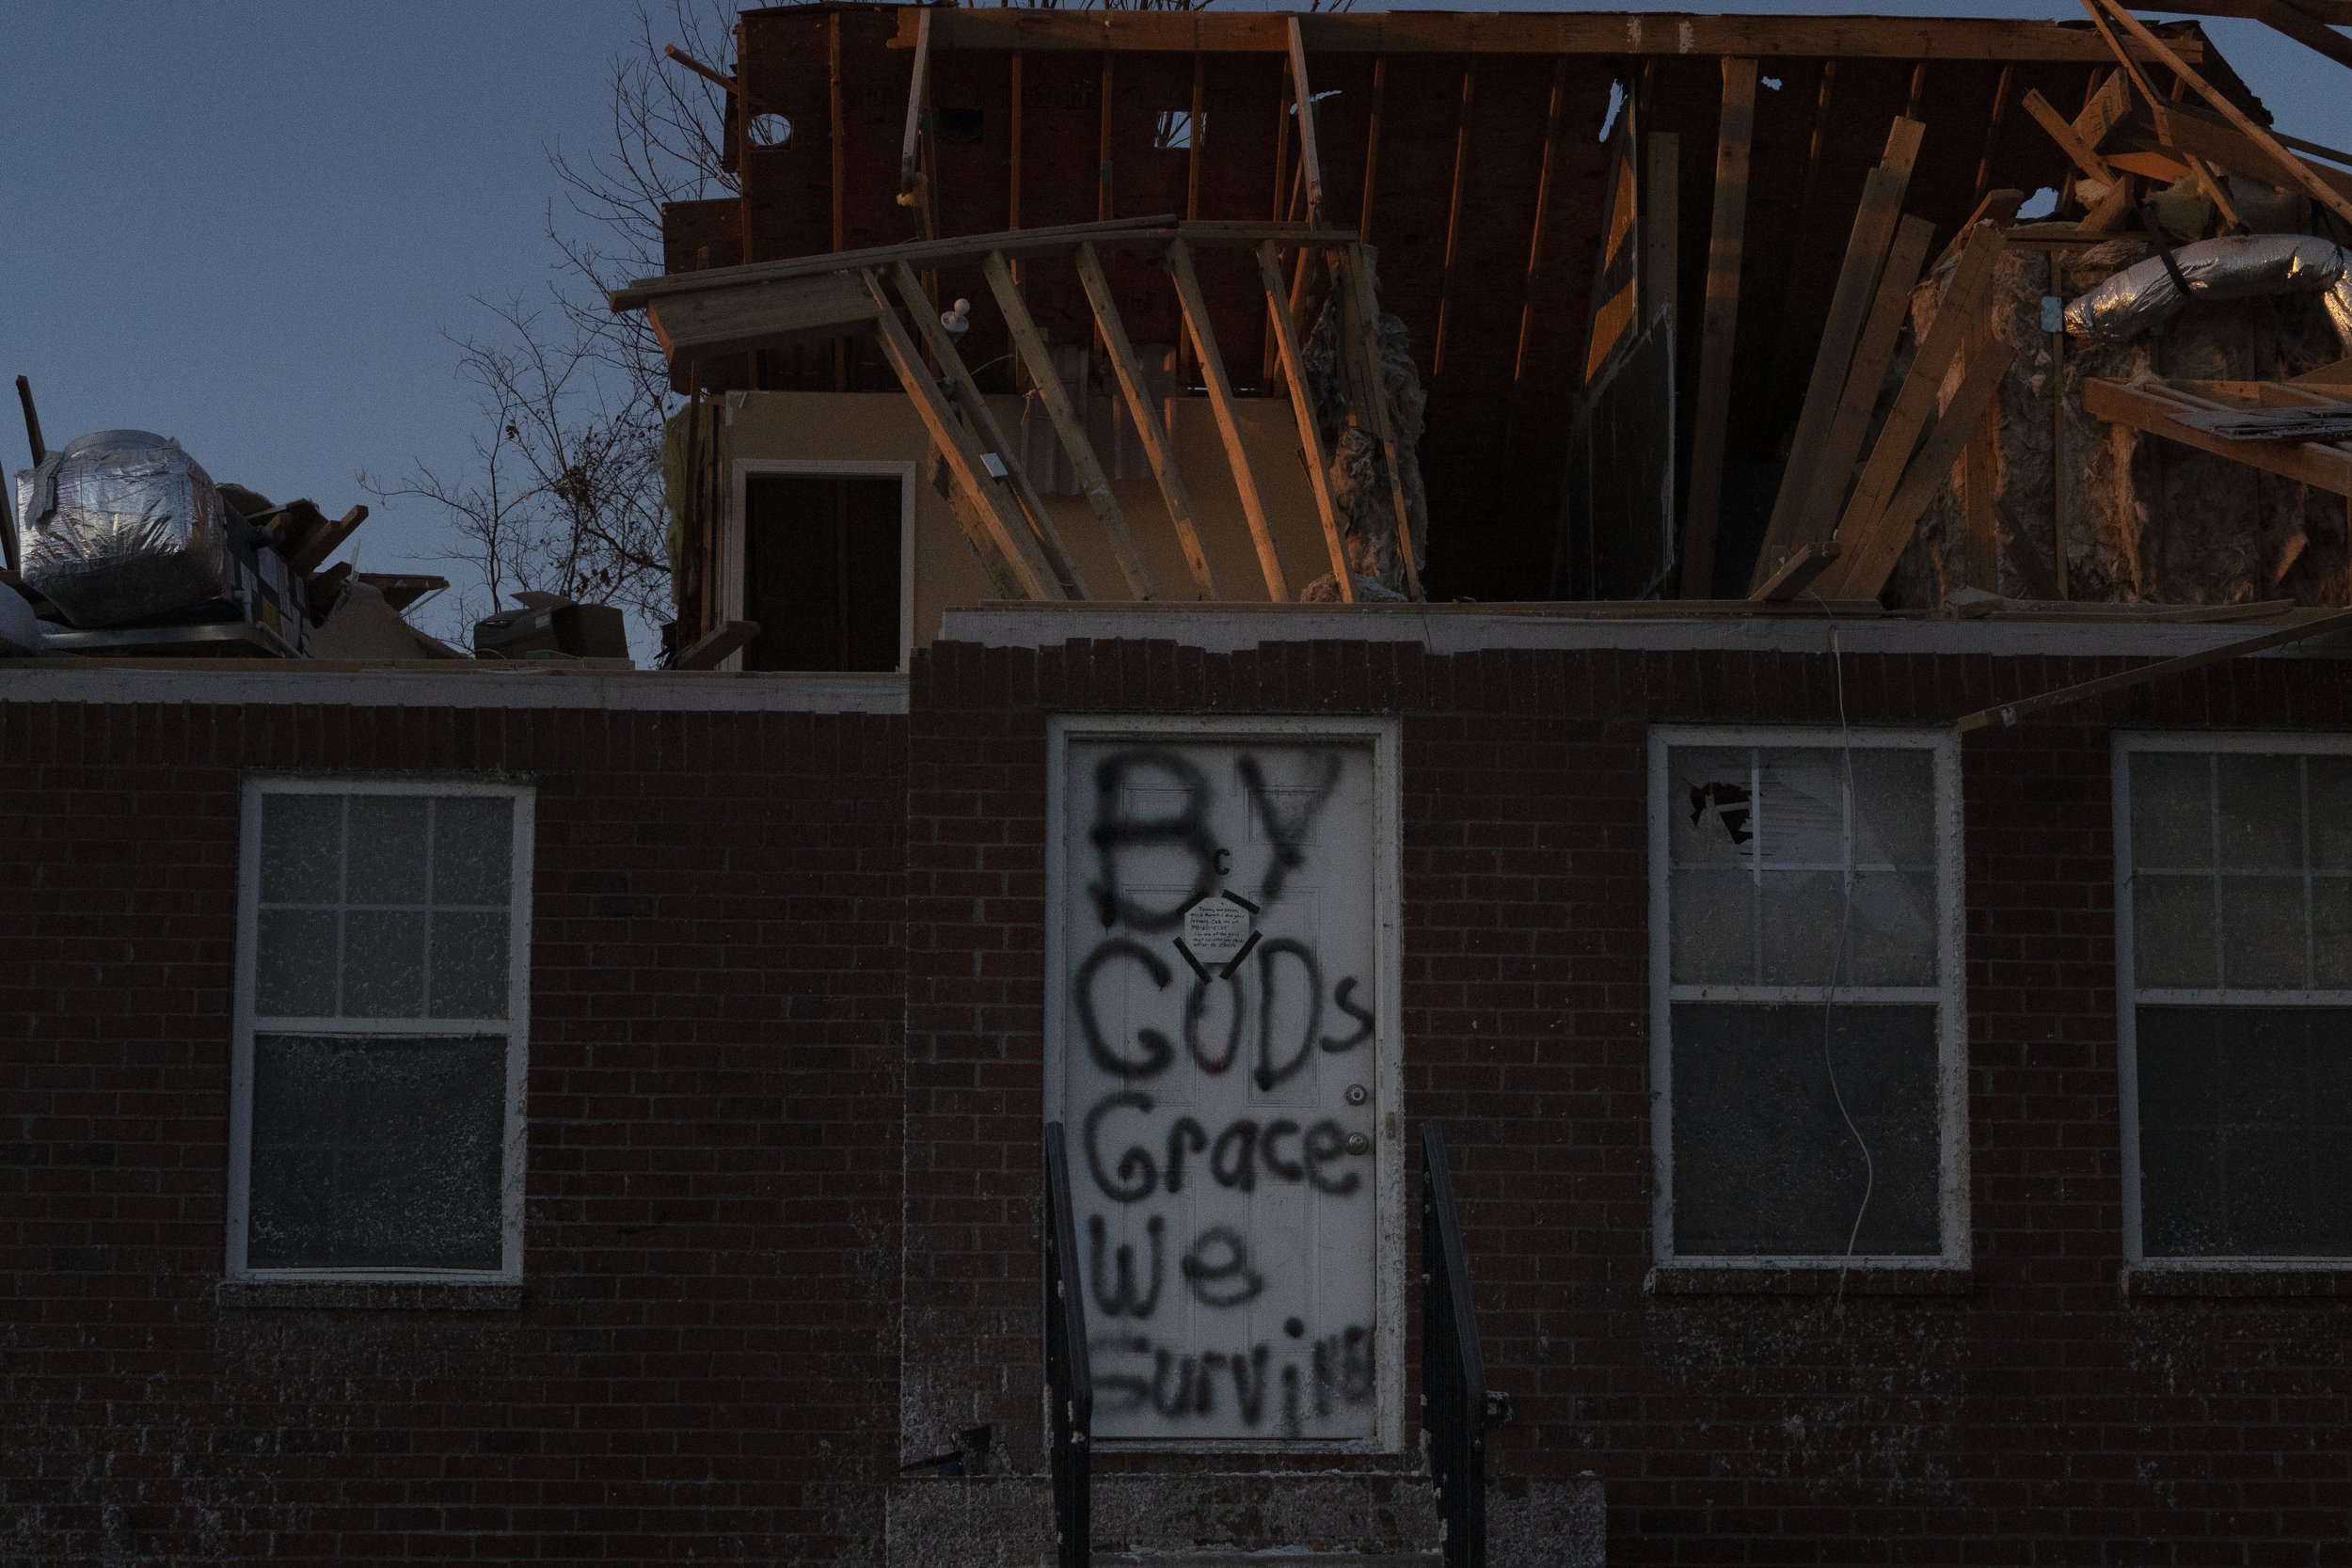  A door is spray painted with the message "By Gods Grace We Survive" on Dec. 20, 2021, following the tornado that ripped through Bowling Green, Ky. (AP Photo/Brynn Anderson) 